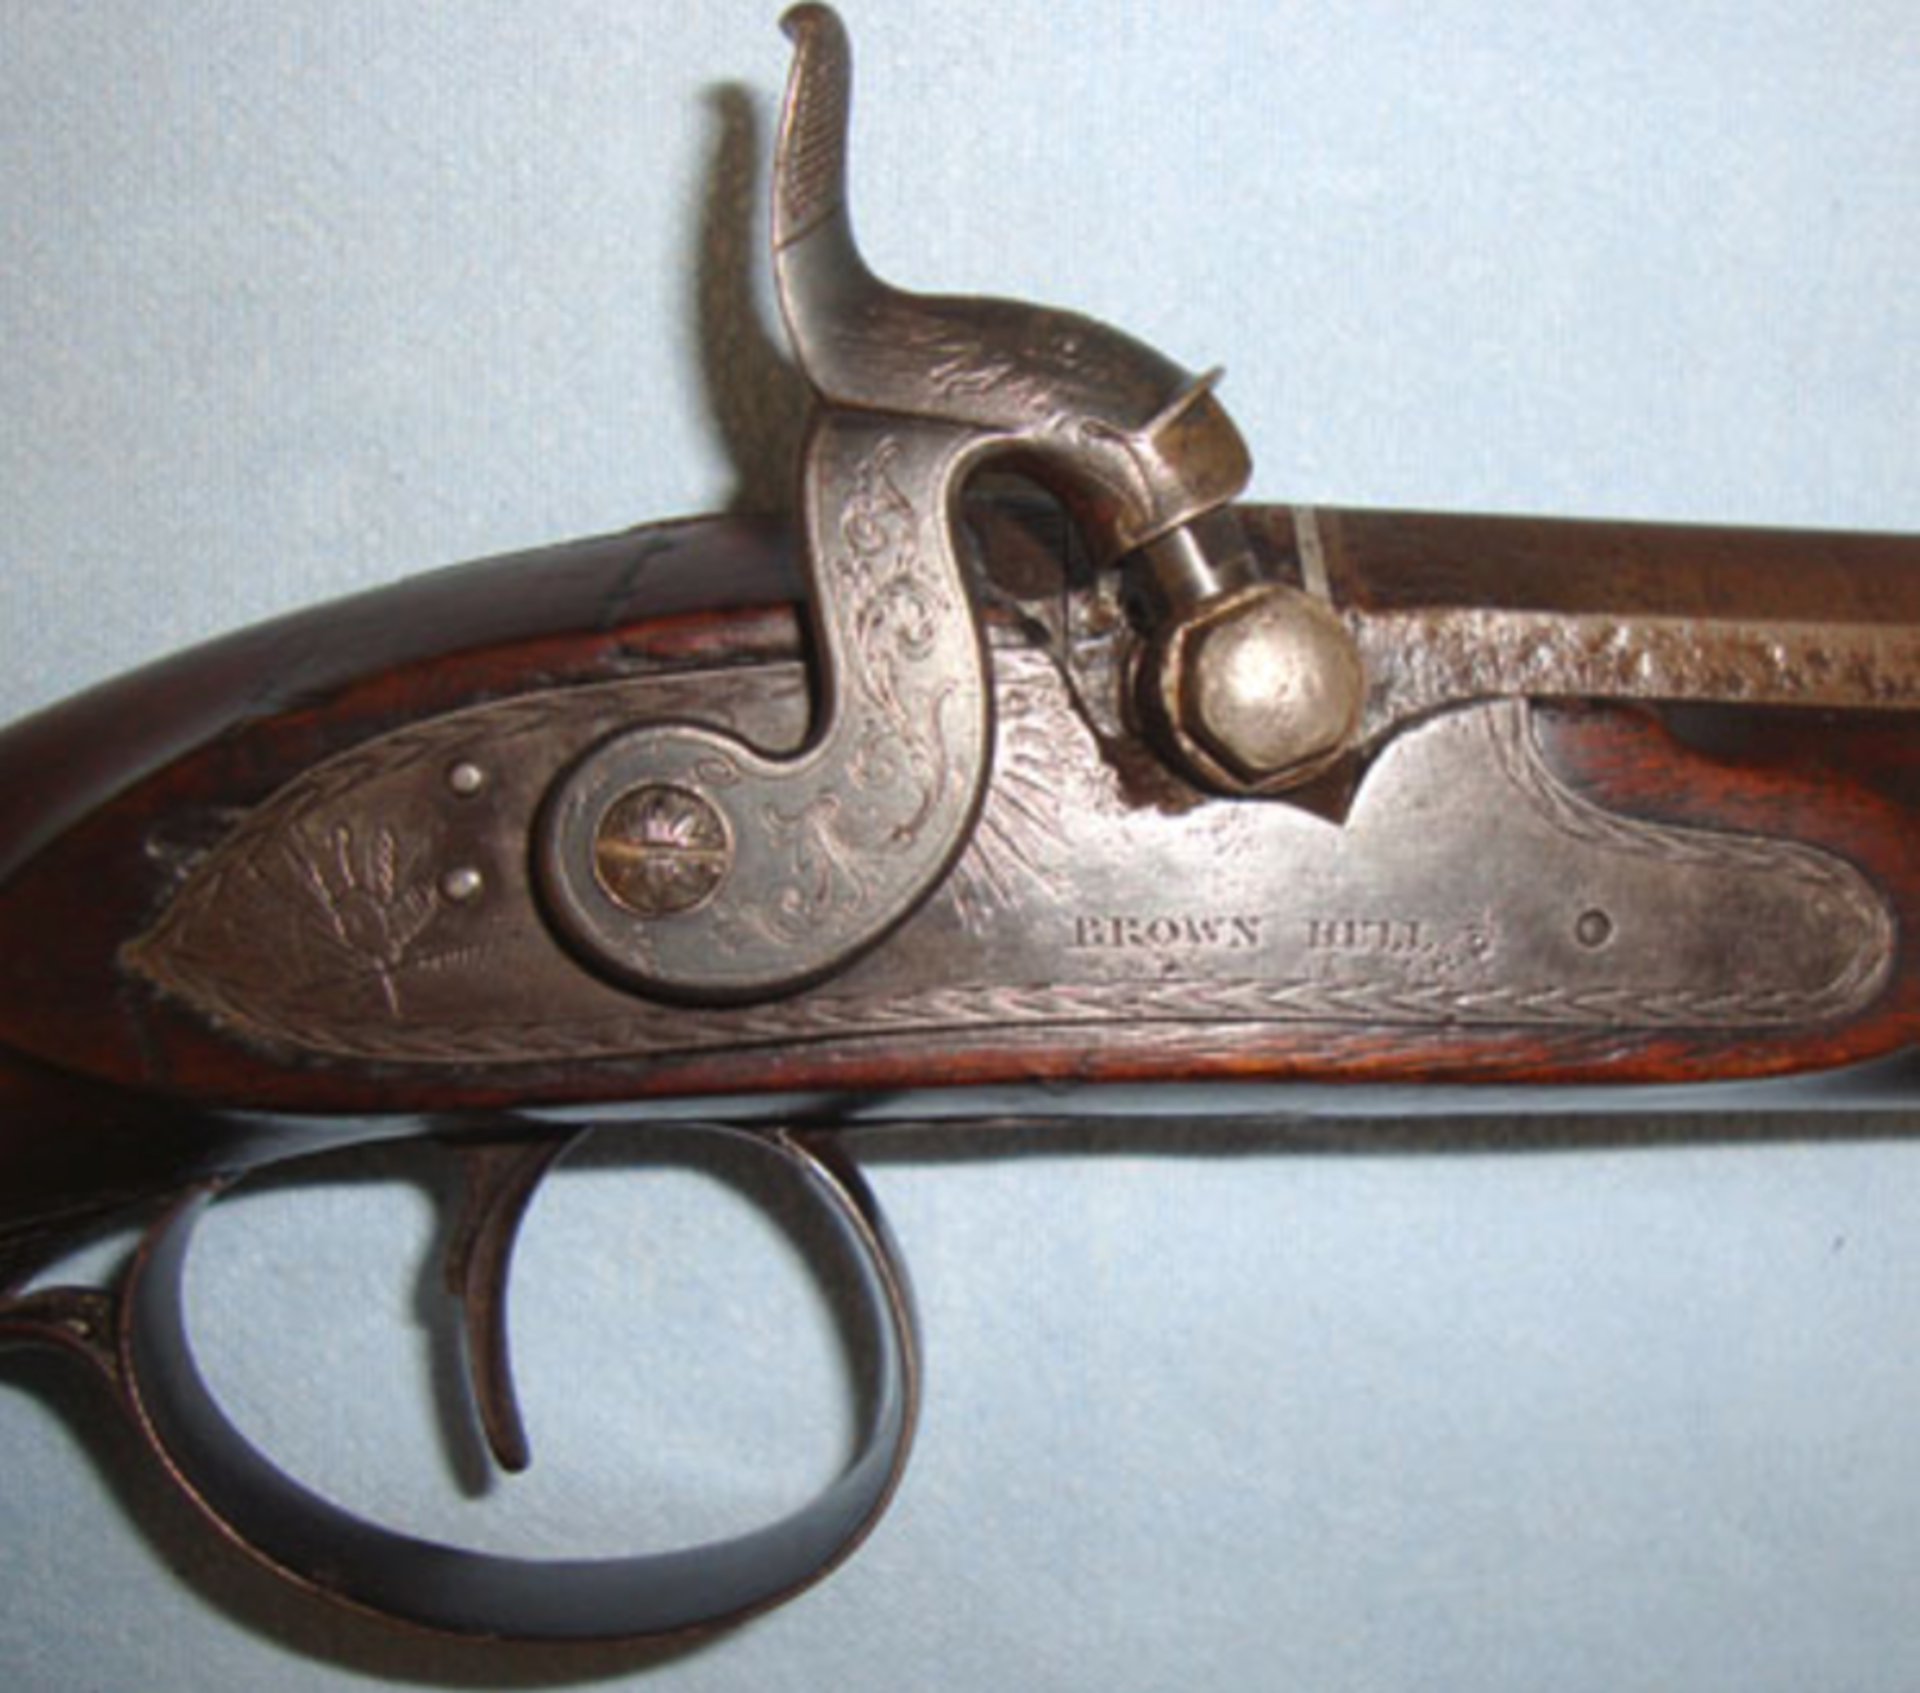 1840 – 1842 English .60” Bore Percussion Pistol (Converted From Flintlock) By John Crosby Brown - Image 3 of 3